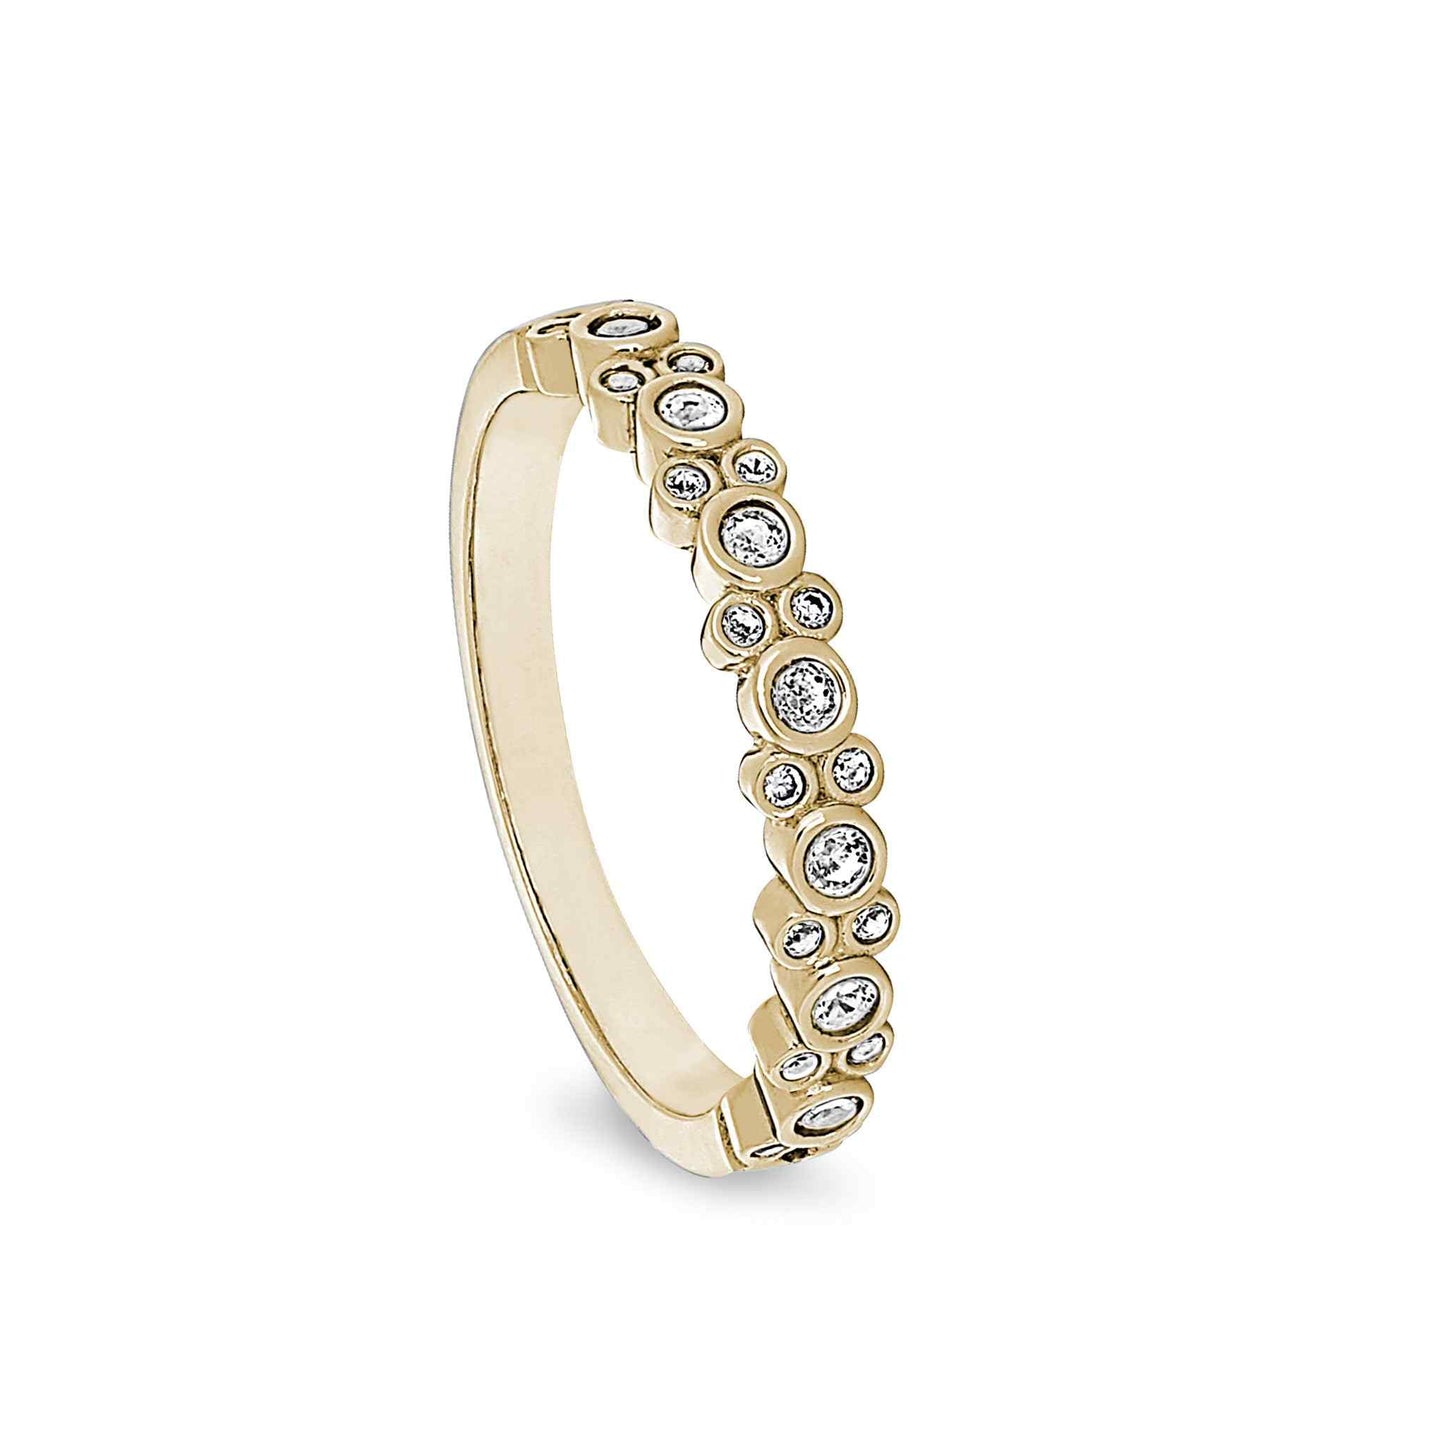 A sterling silver bubbles ring with simulated diamonds displayed on a neutral white background.